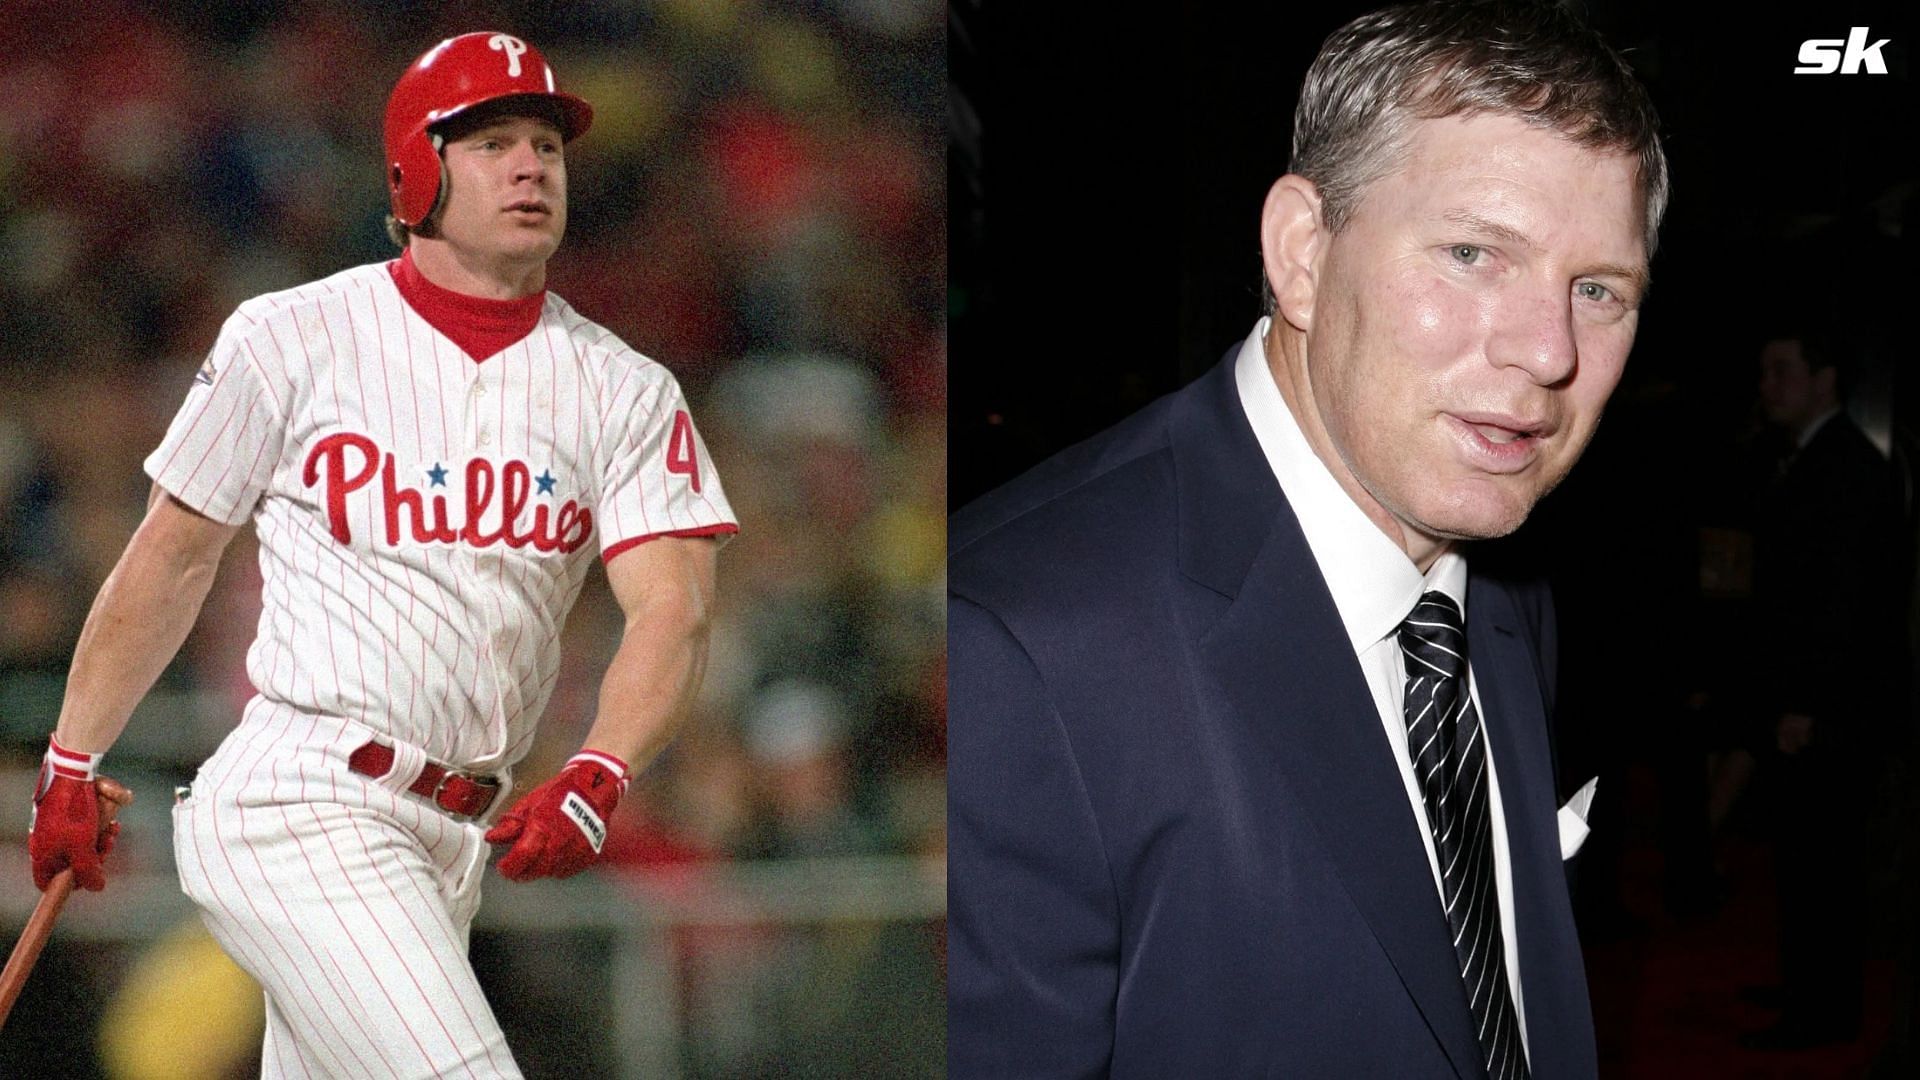 Ron Darling: Lenny Dykstra racially taunted pitcher in '86 World Series